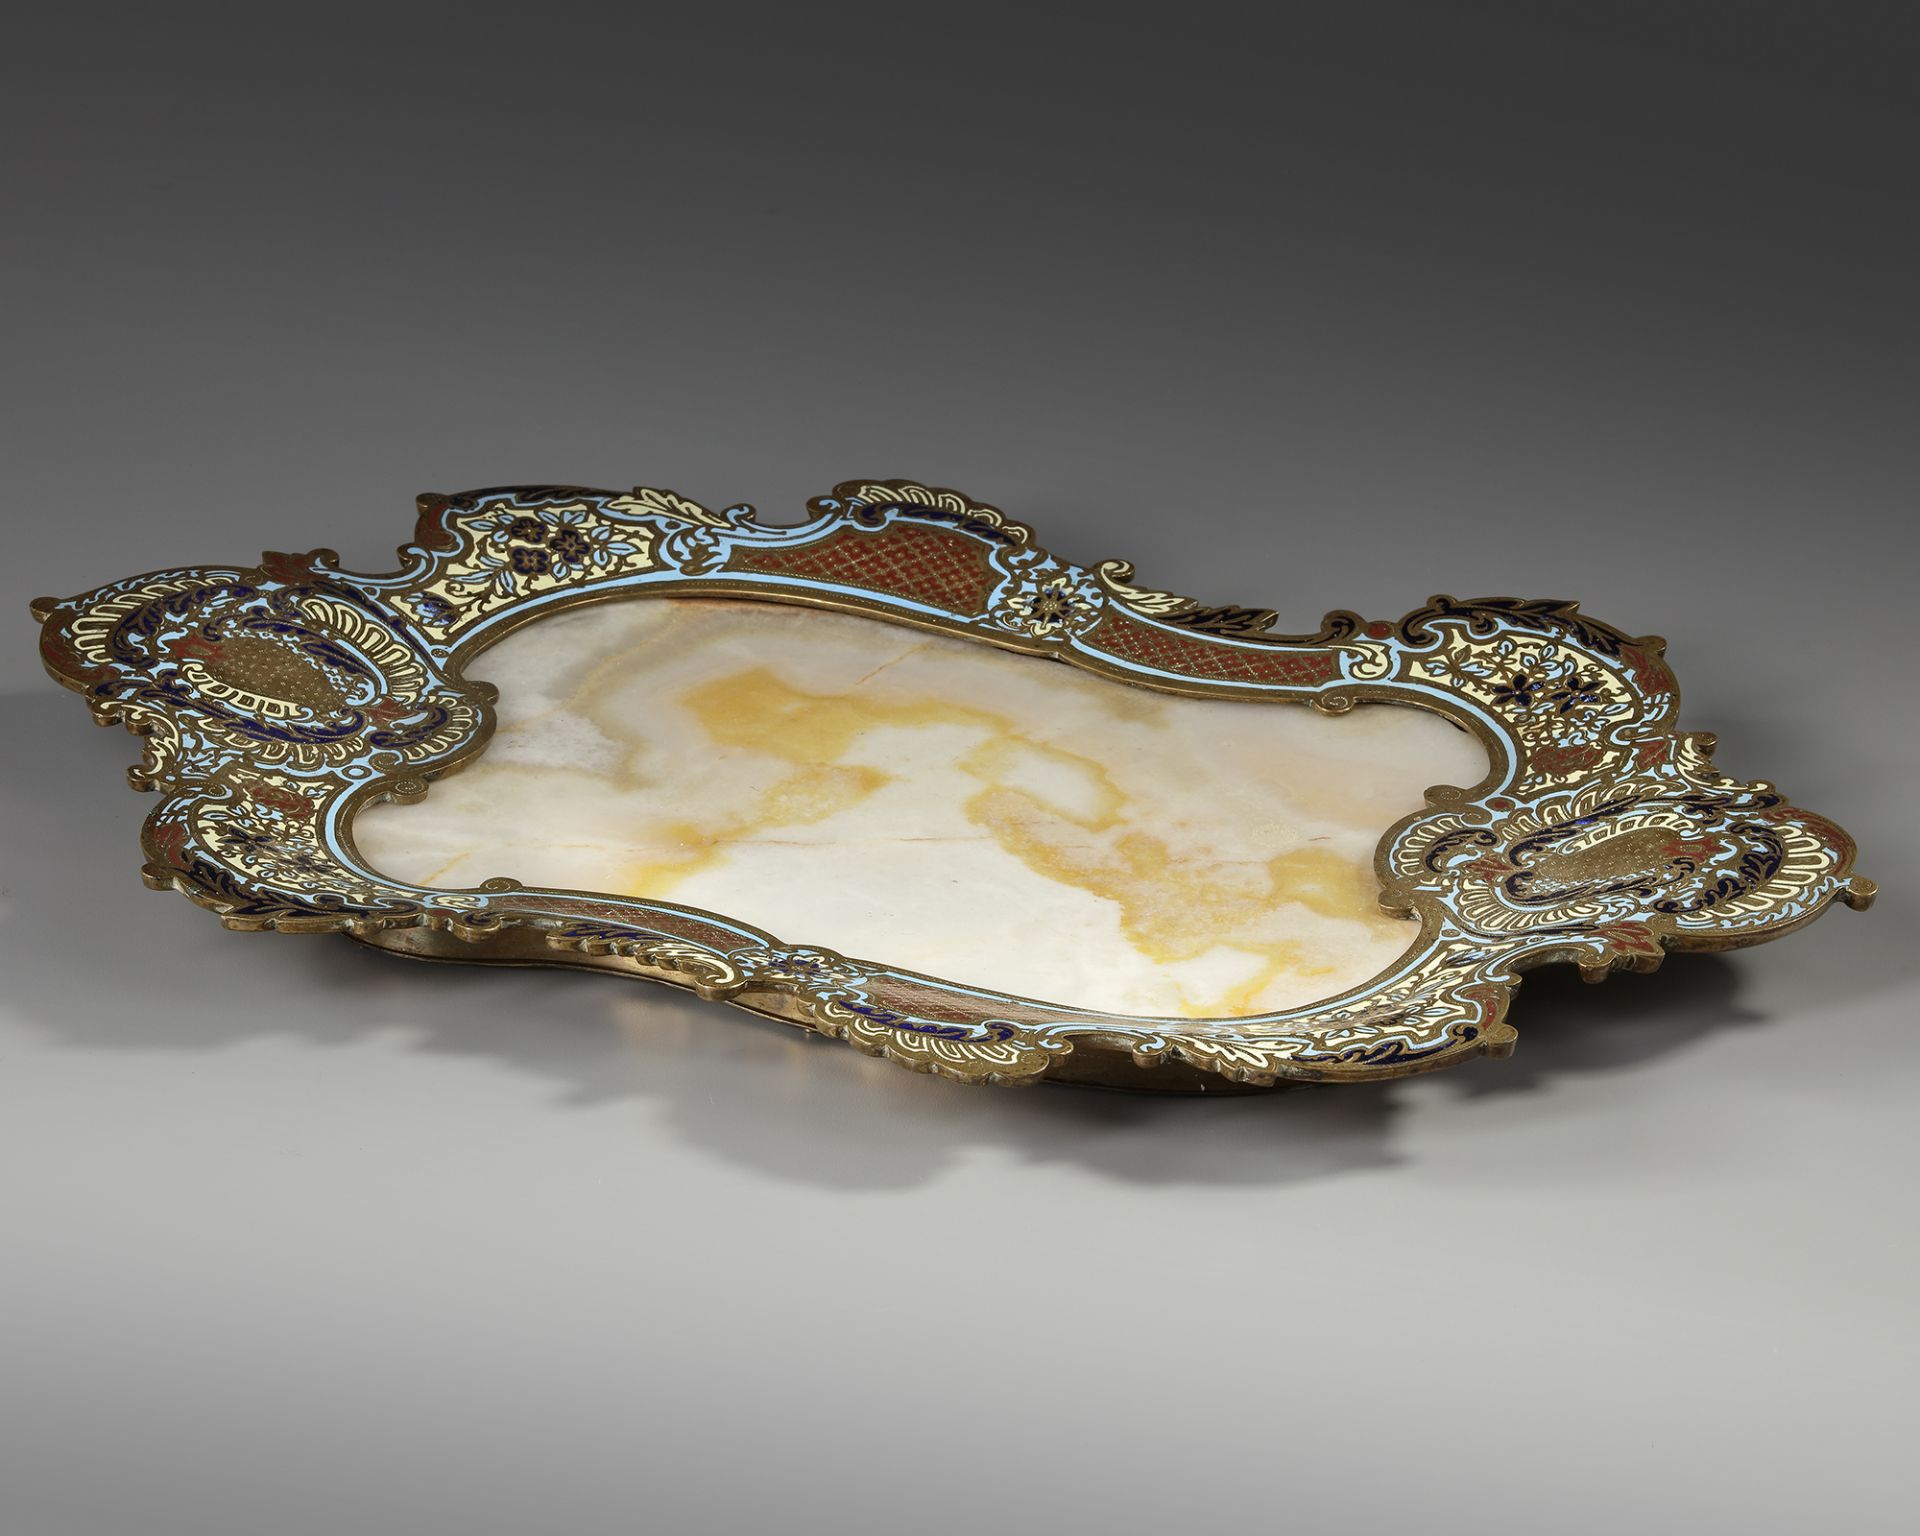 A FRENCH ORMOLU AND CHAMPLEVÉ ENAMEL MOUNTED MARBLE DRESSER STAND, 19TH CENTURY - Image 2 of 3